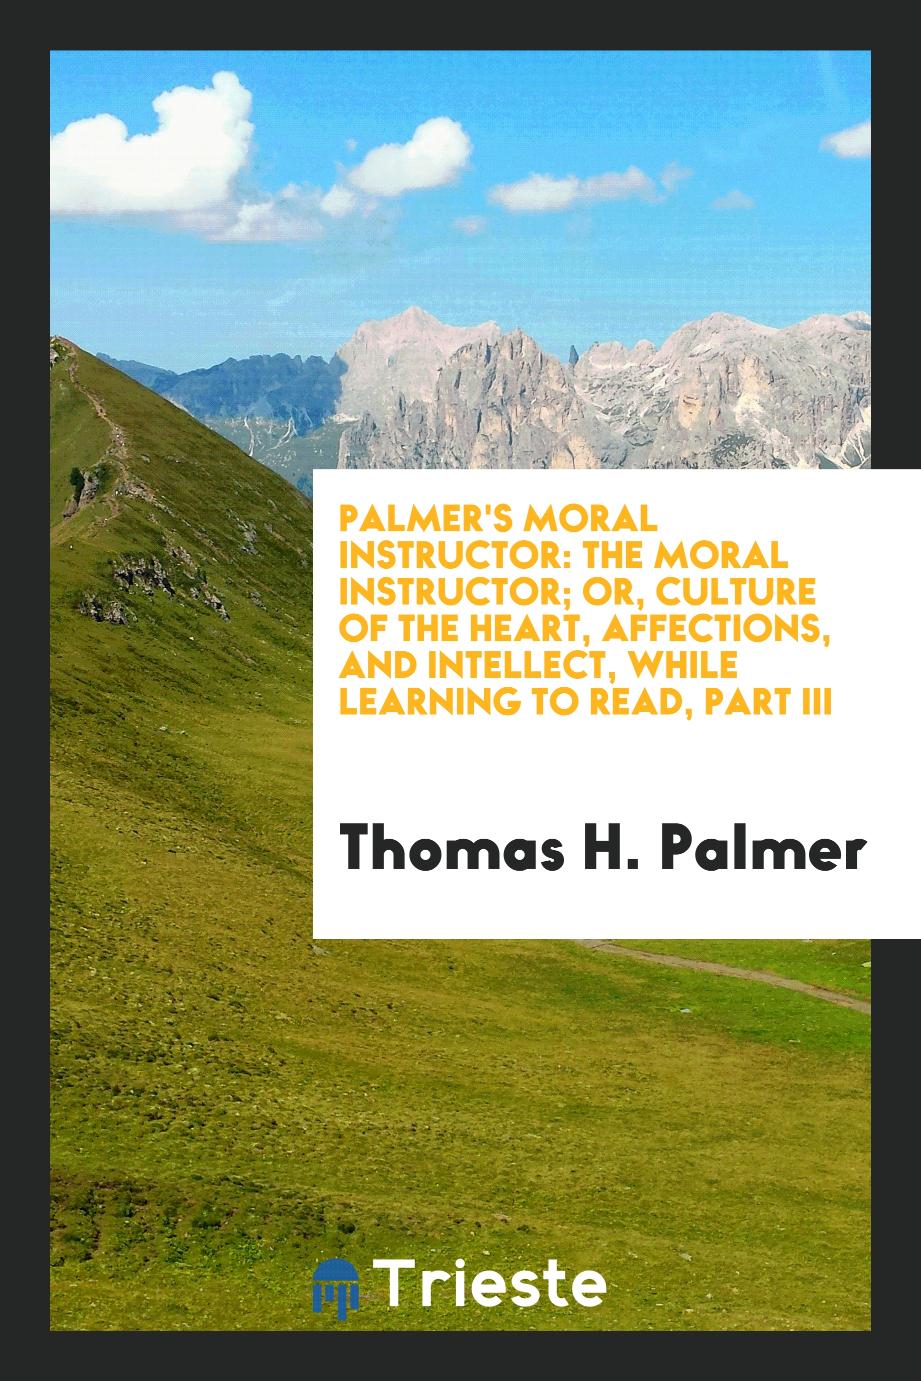 Palmer's Moral Instructor: The Moral Instructor; Or, Culture of the Heart, Affections, and Intellect, While Learning to Read, Part III